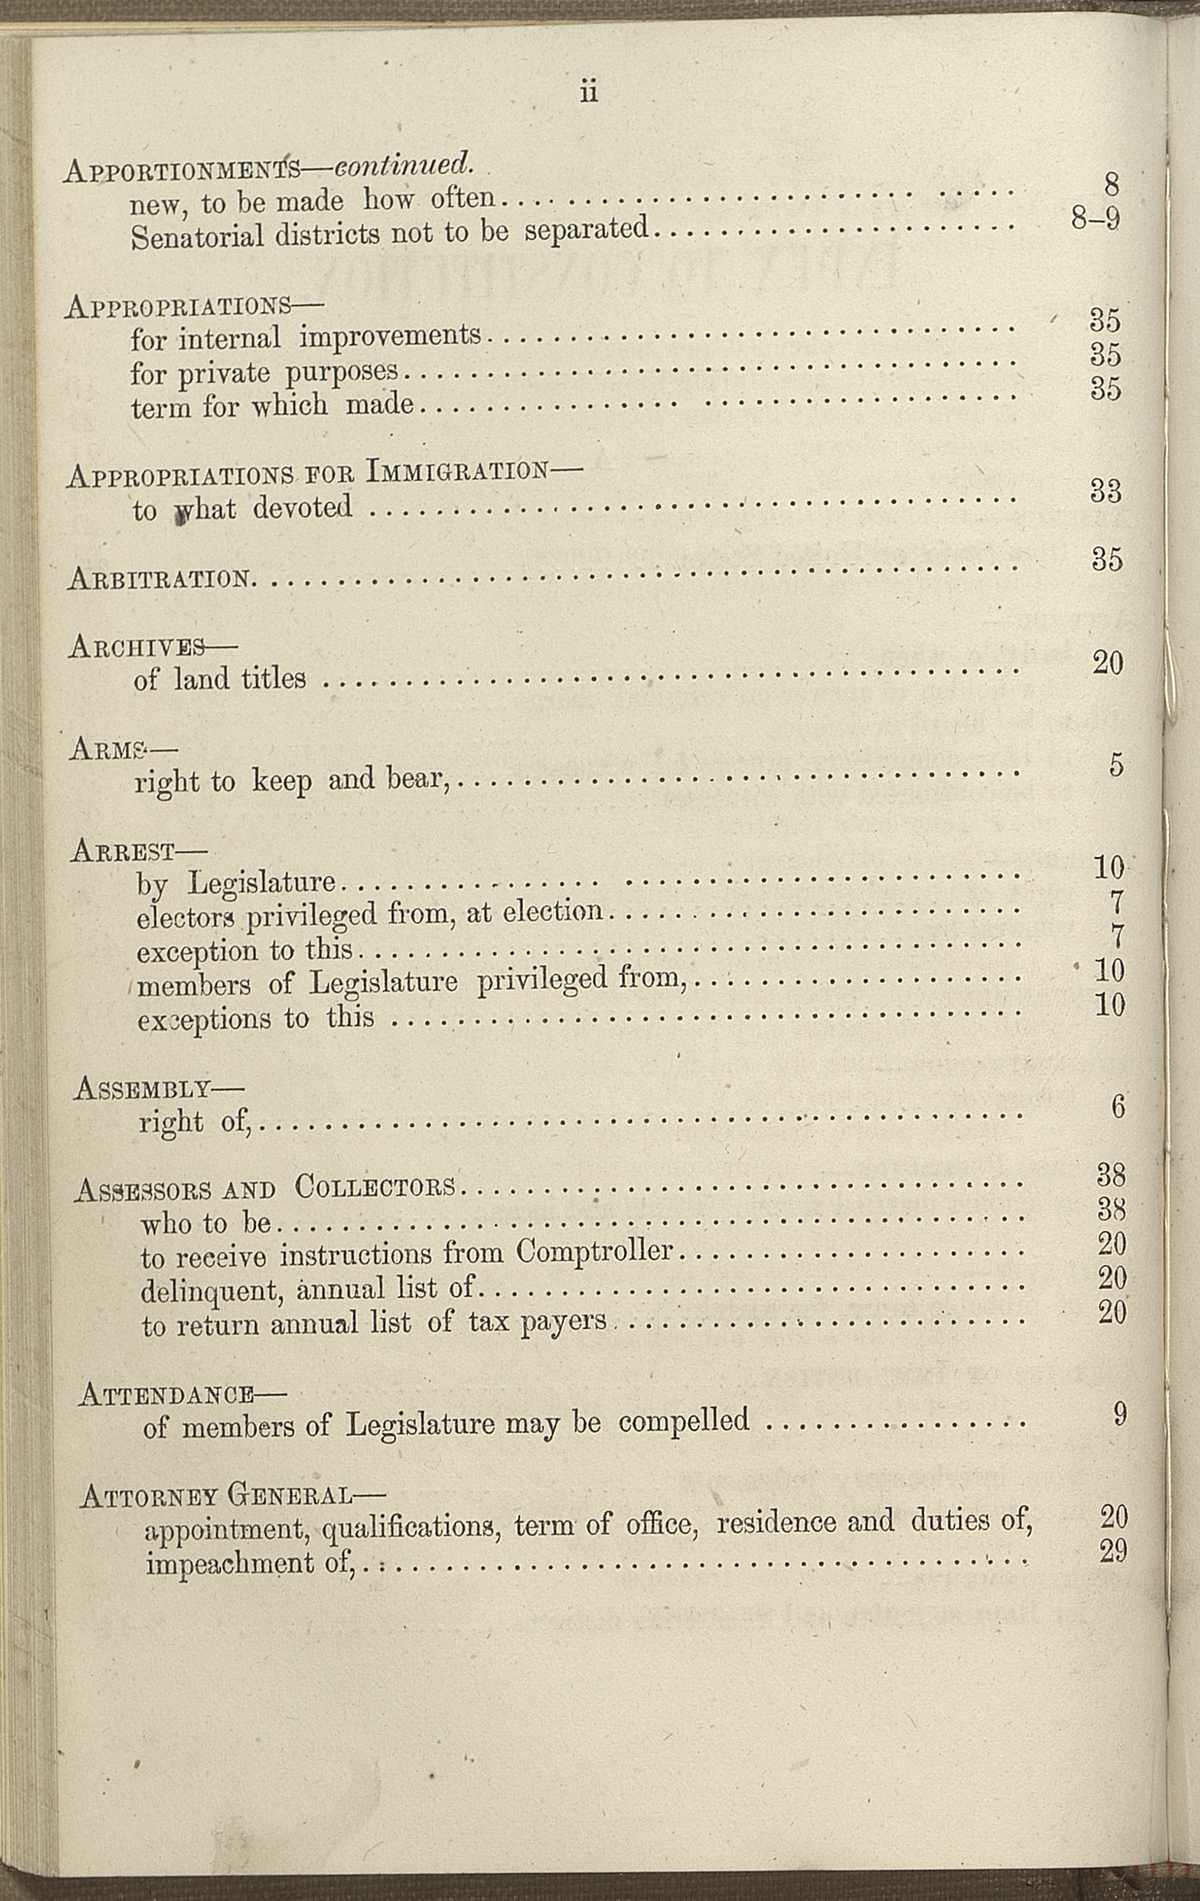 page 2 - 1869 index